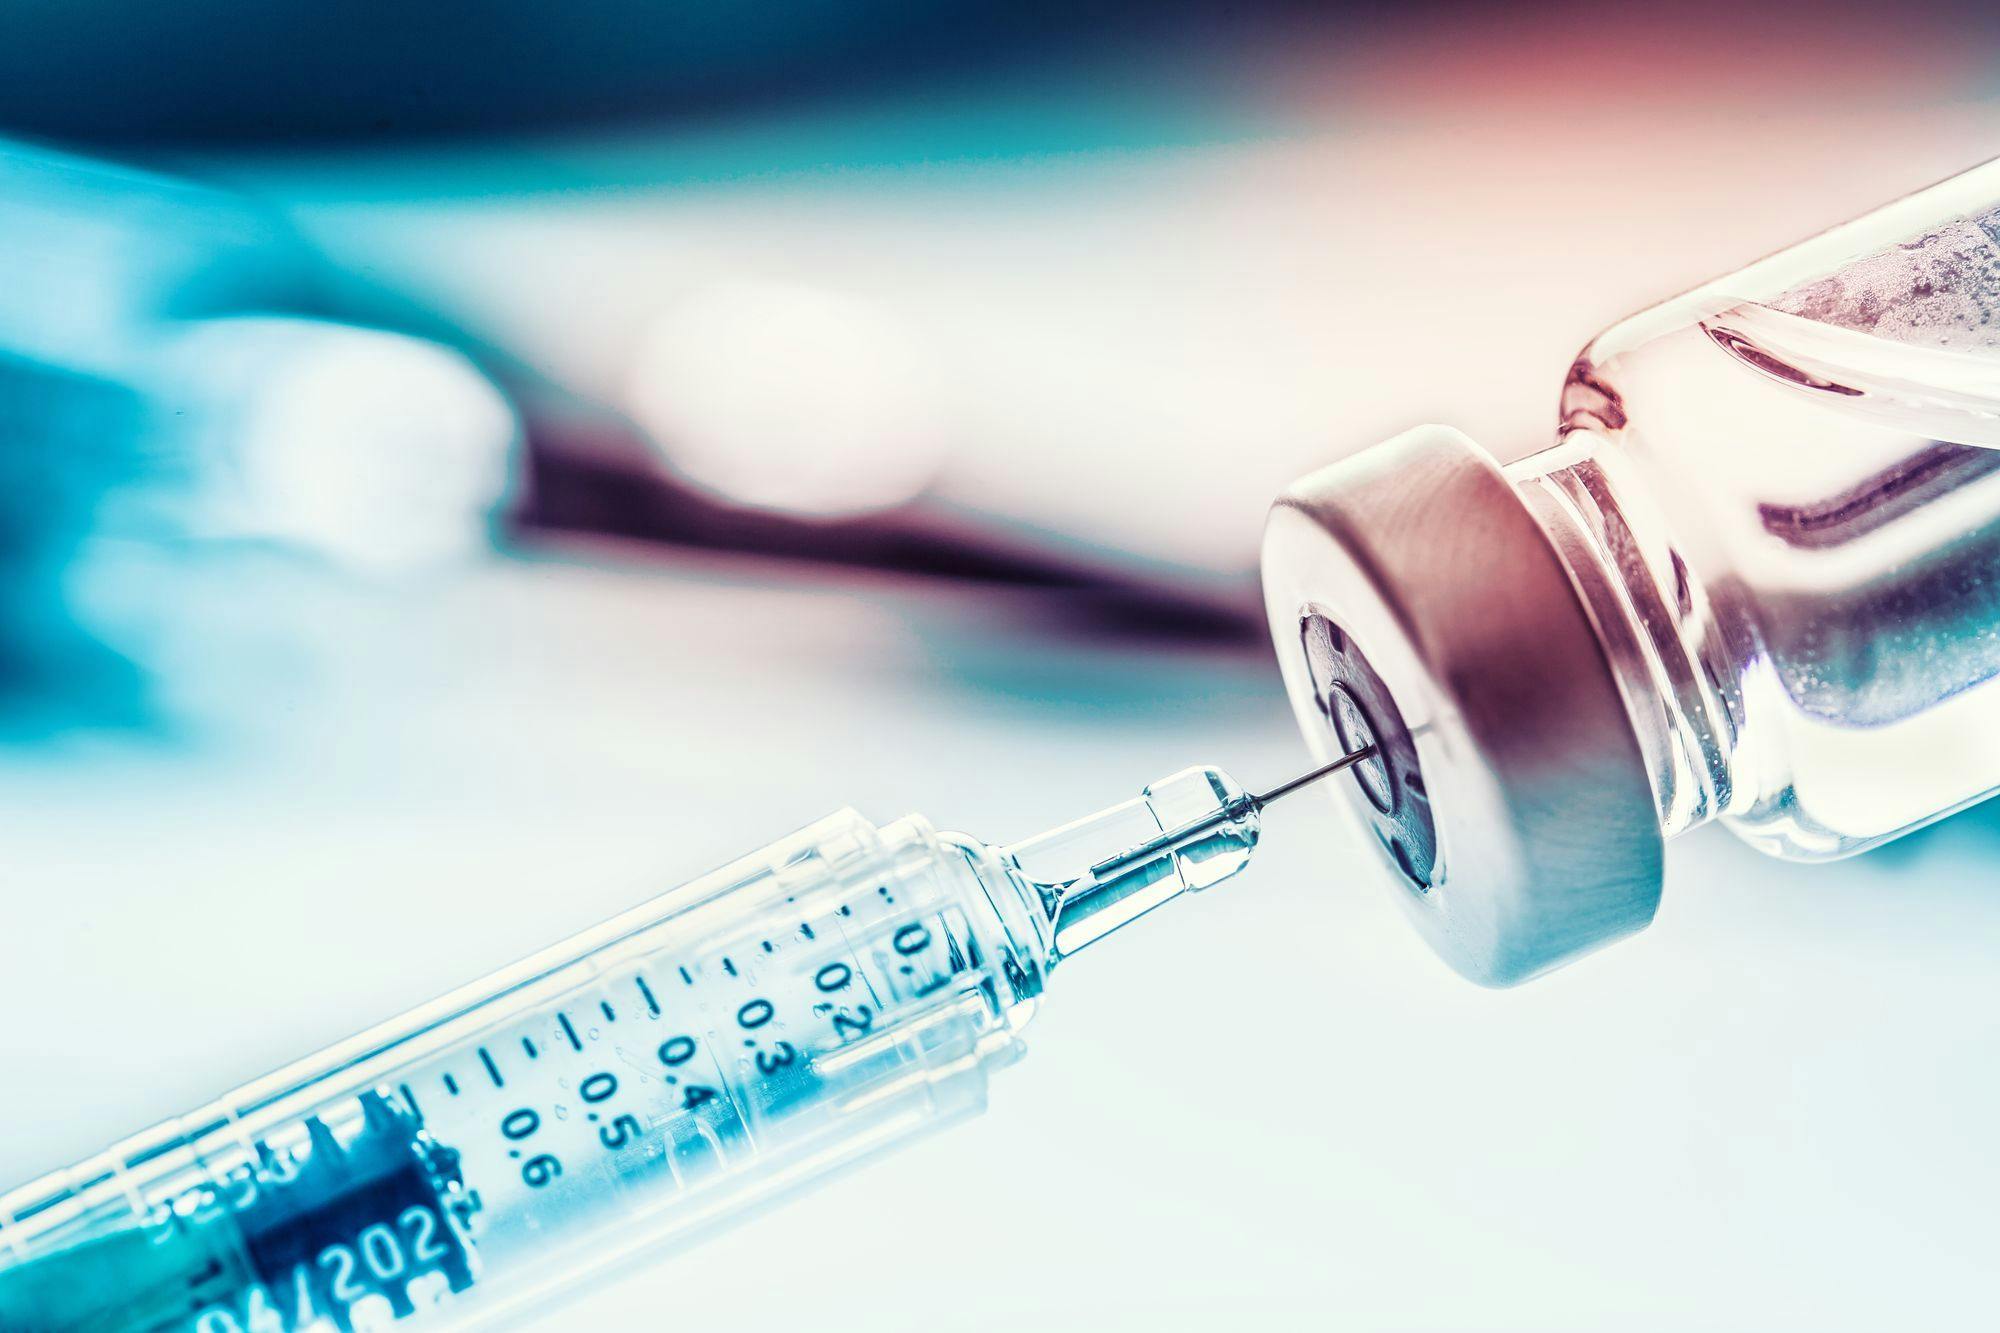 Close-up medical syringe with a vaccine | Image credit: weyo - stock.adobe.com